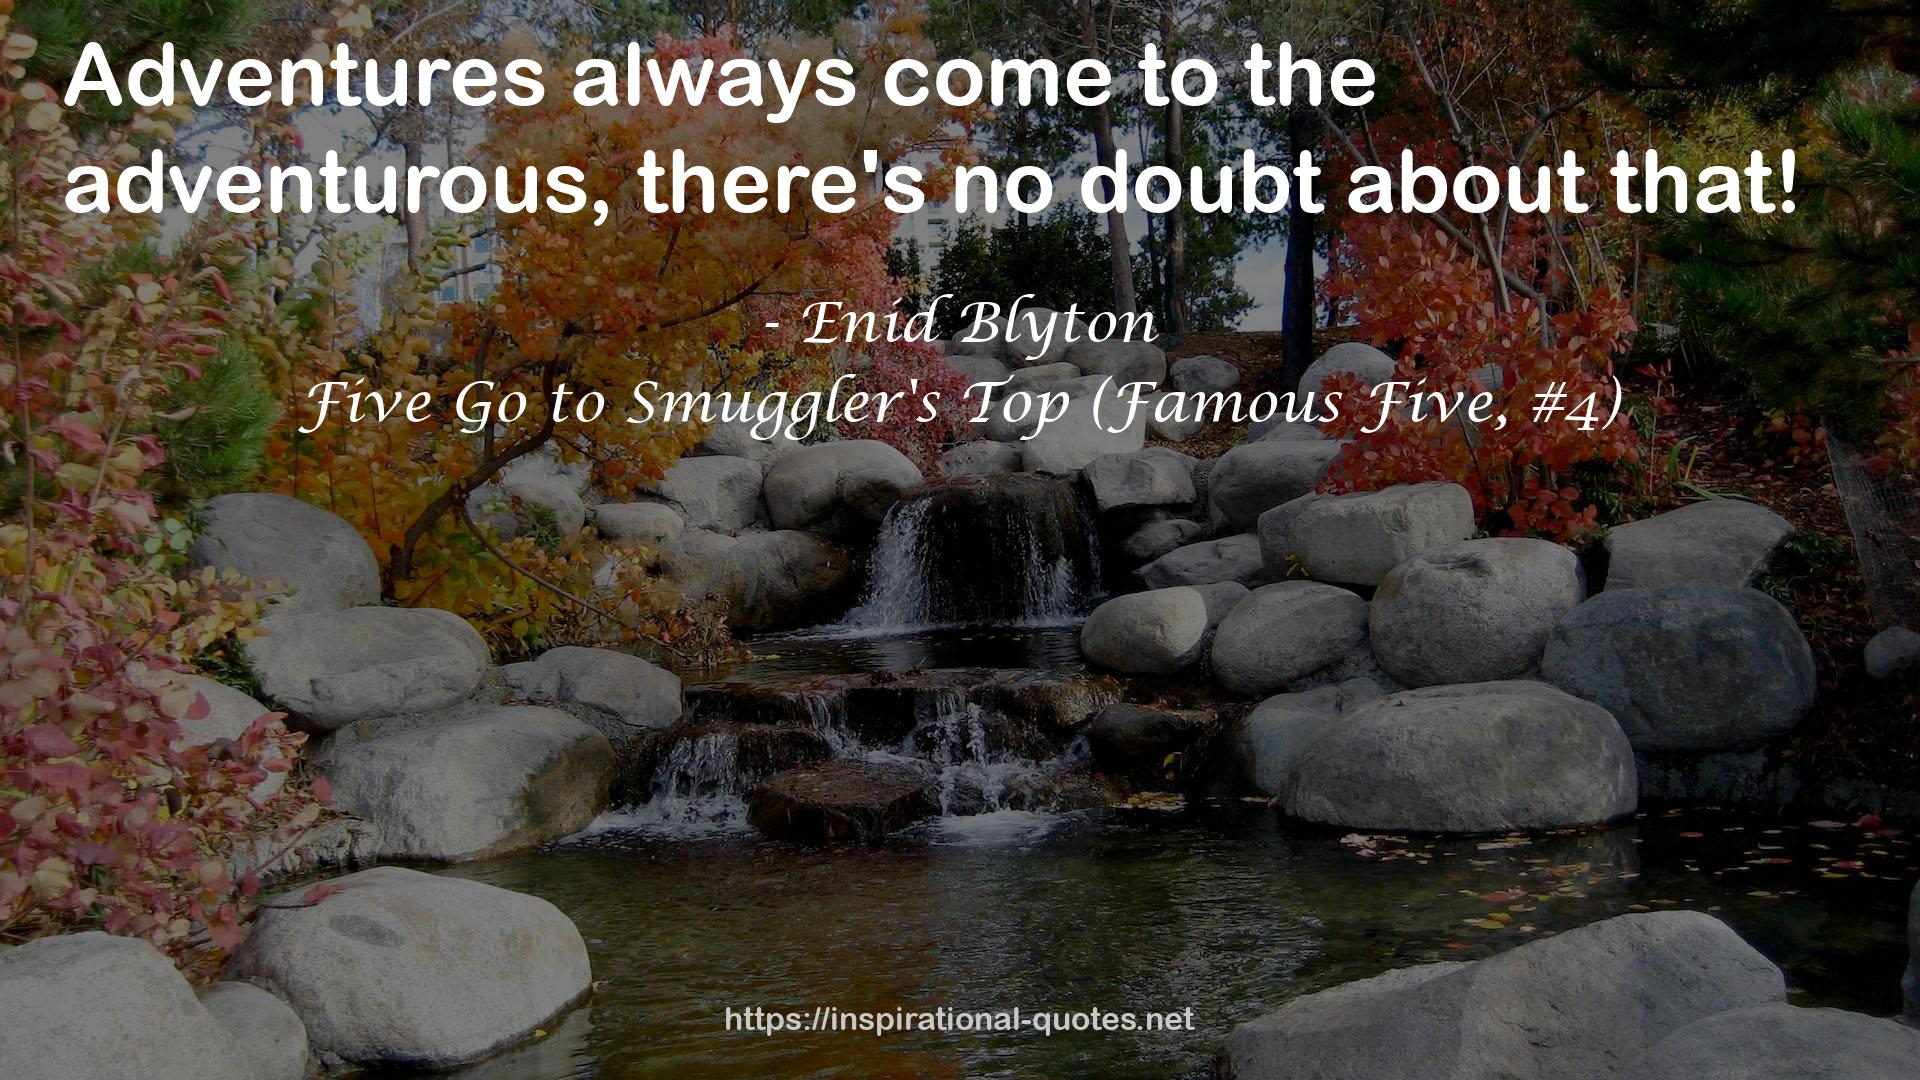 Five Go to Smuggler's Top (Famous Five, #4) QUOTES